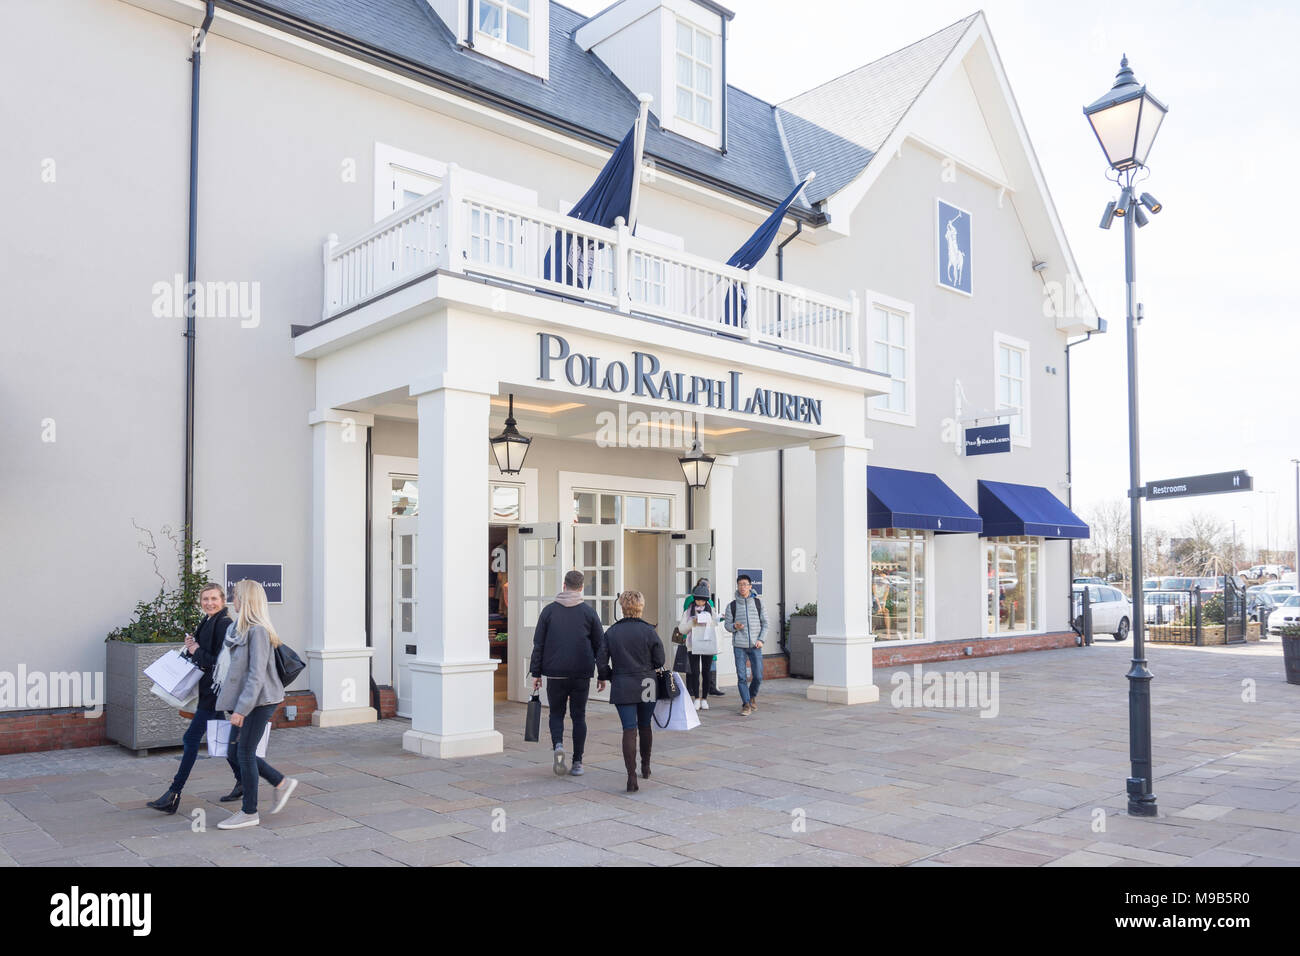 Polo Ralph Lauren store à Bicester Village Outlet Shopping Centre,  Bicester, Oxfordshire, Angleterre, Royaume-Uni Photo Stock - Alamy